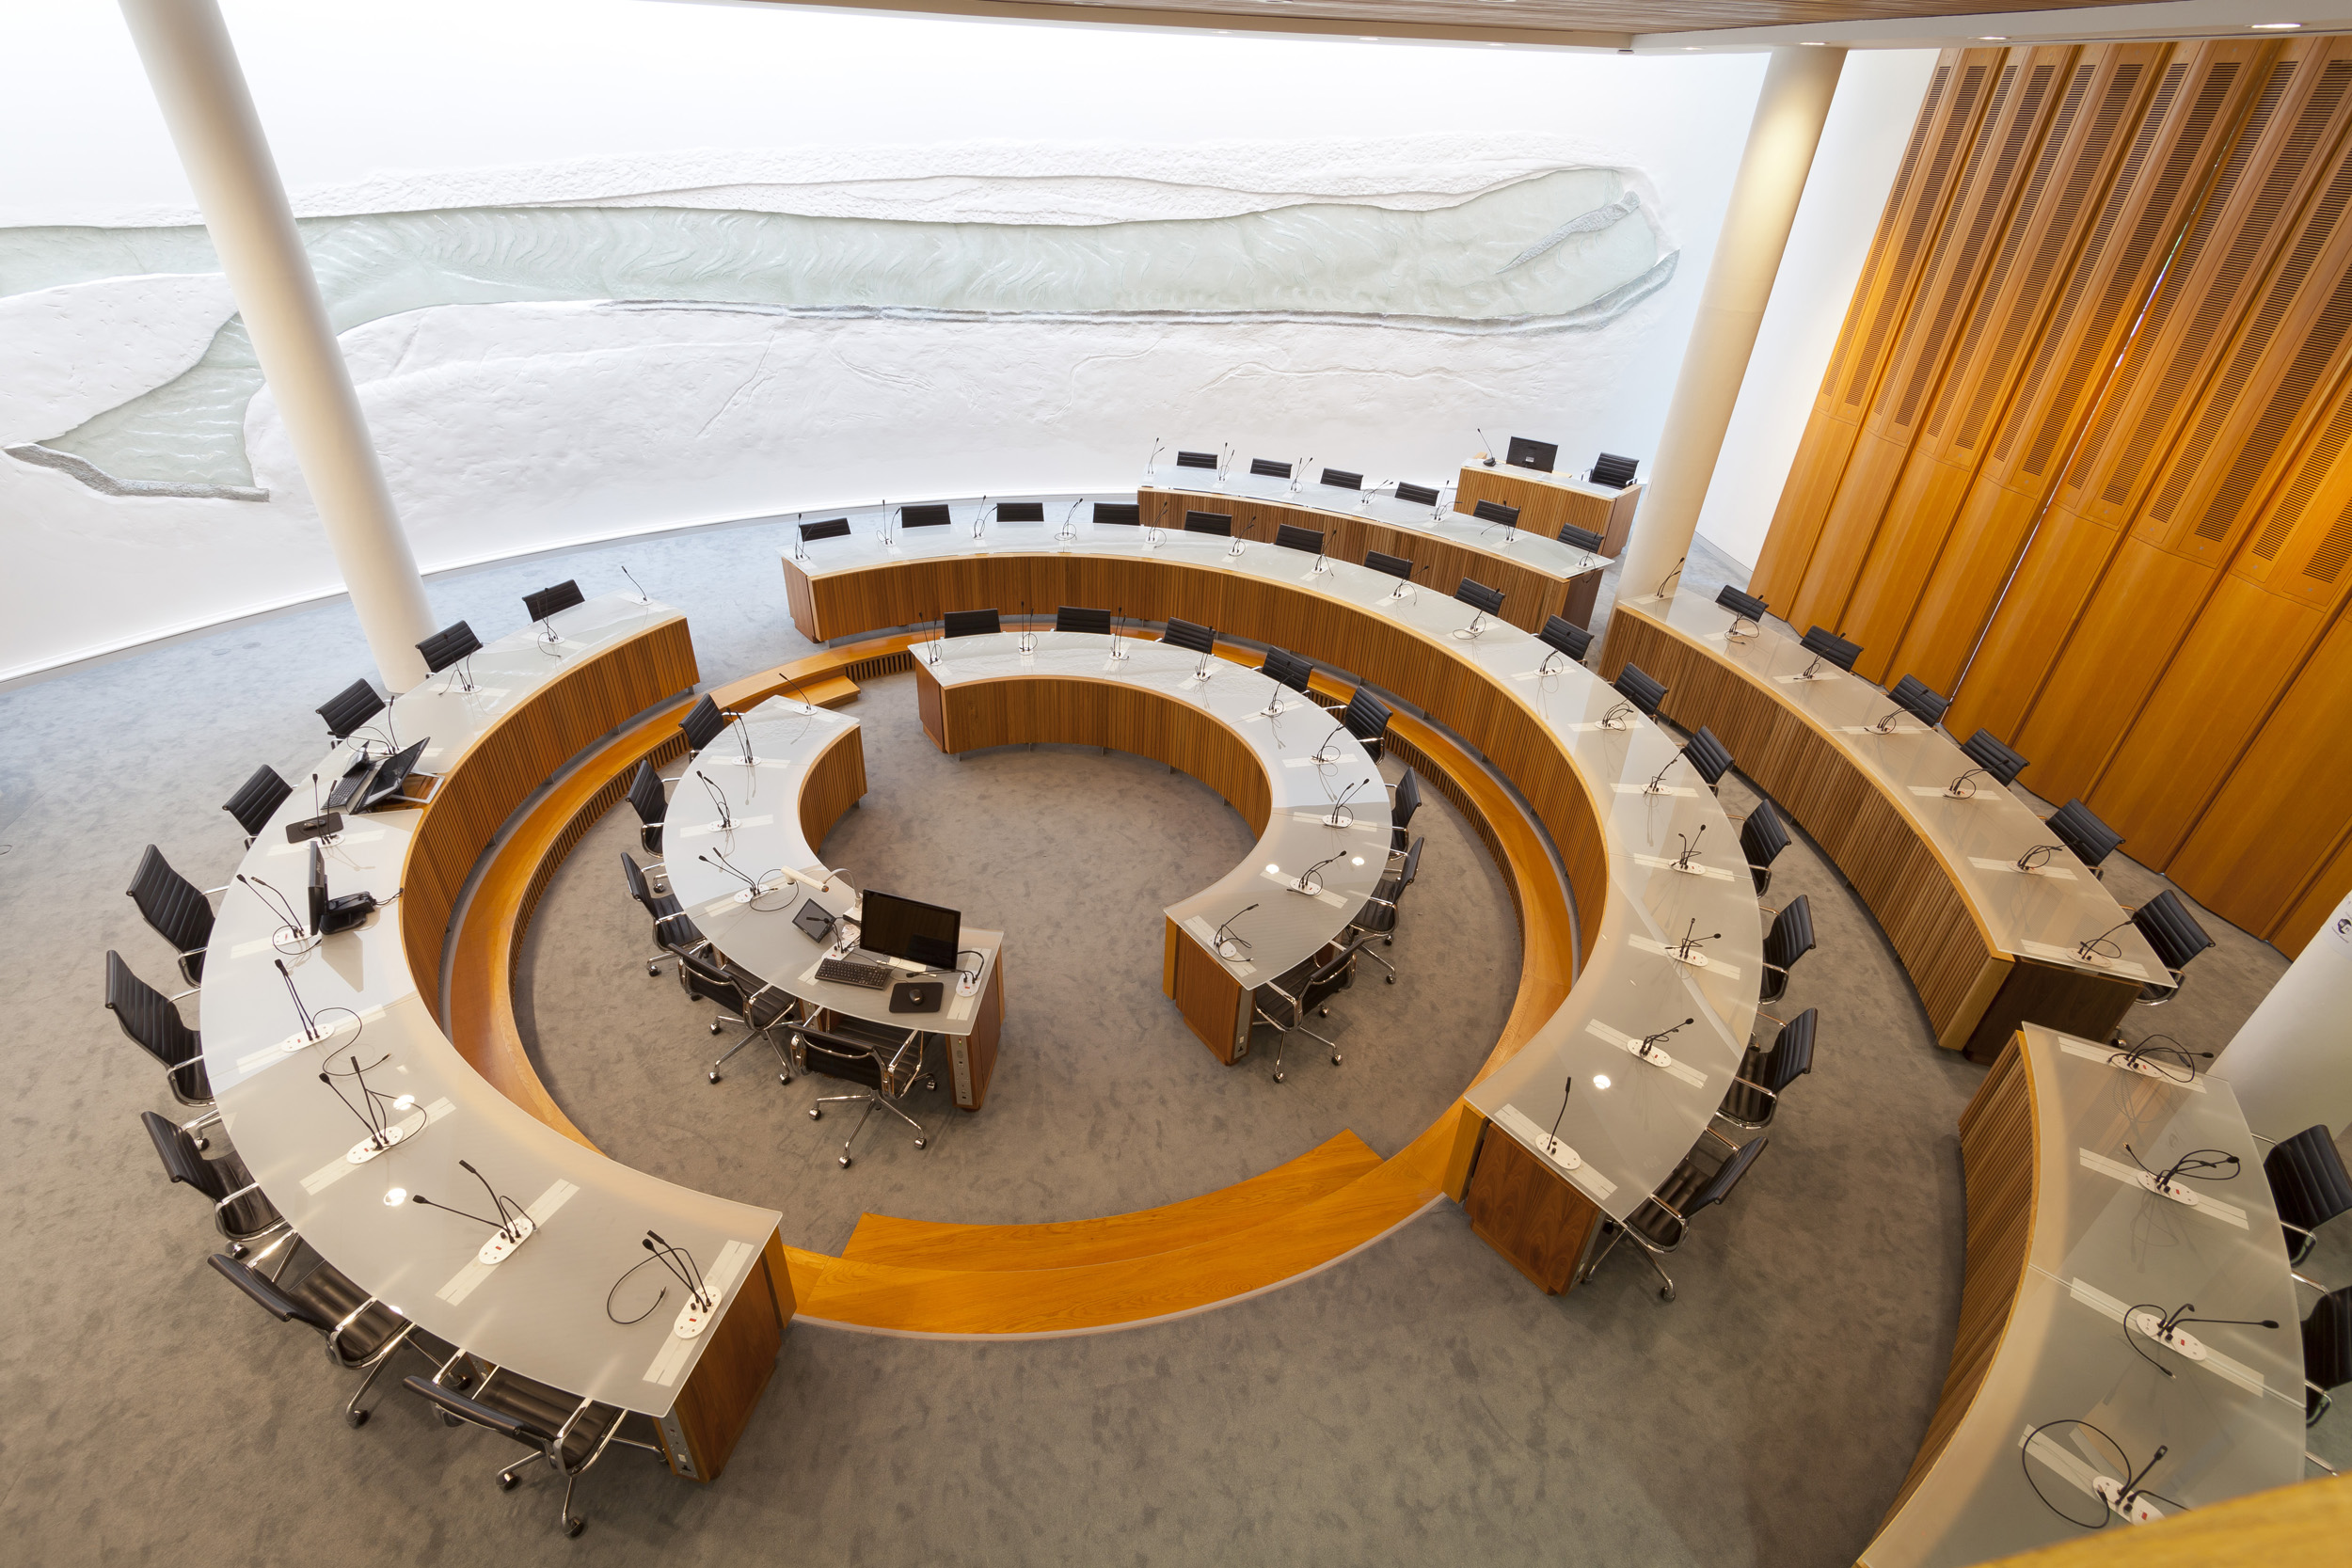 High level view of Council Chamber with long circular tables